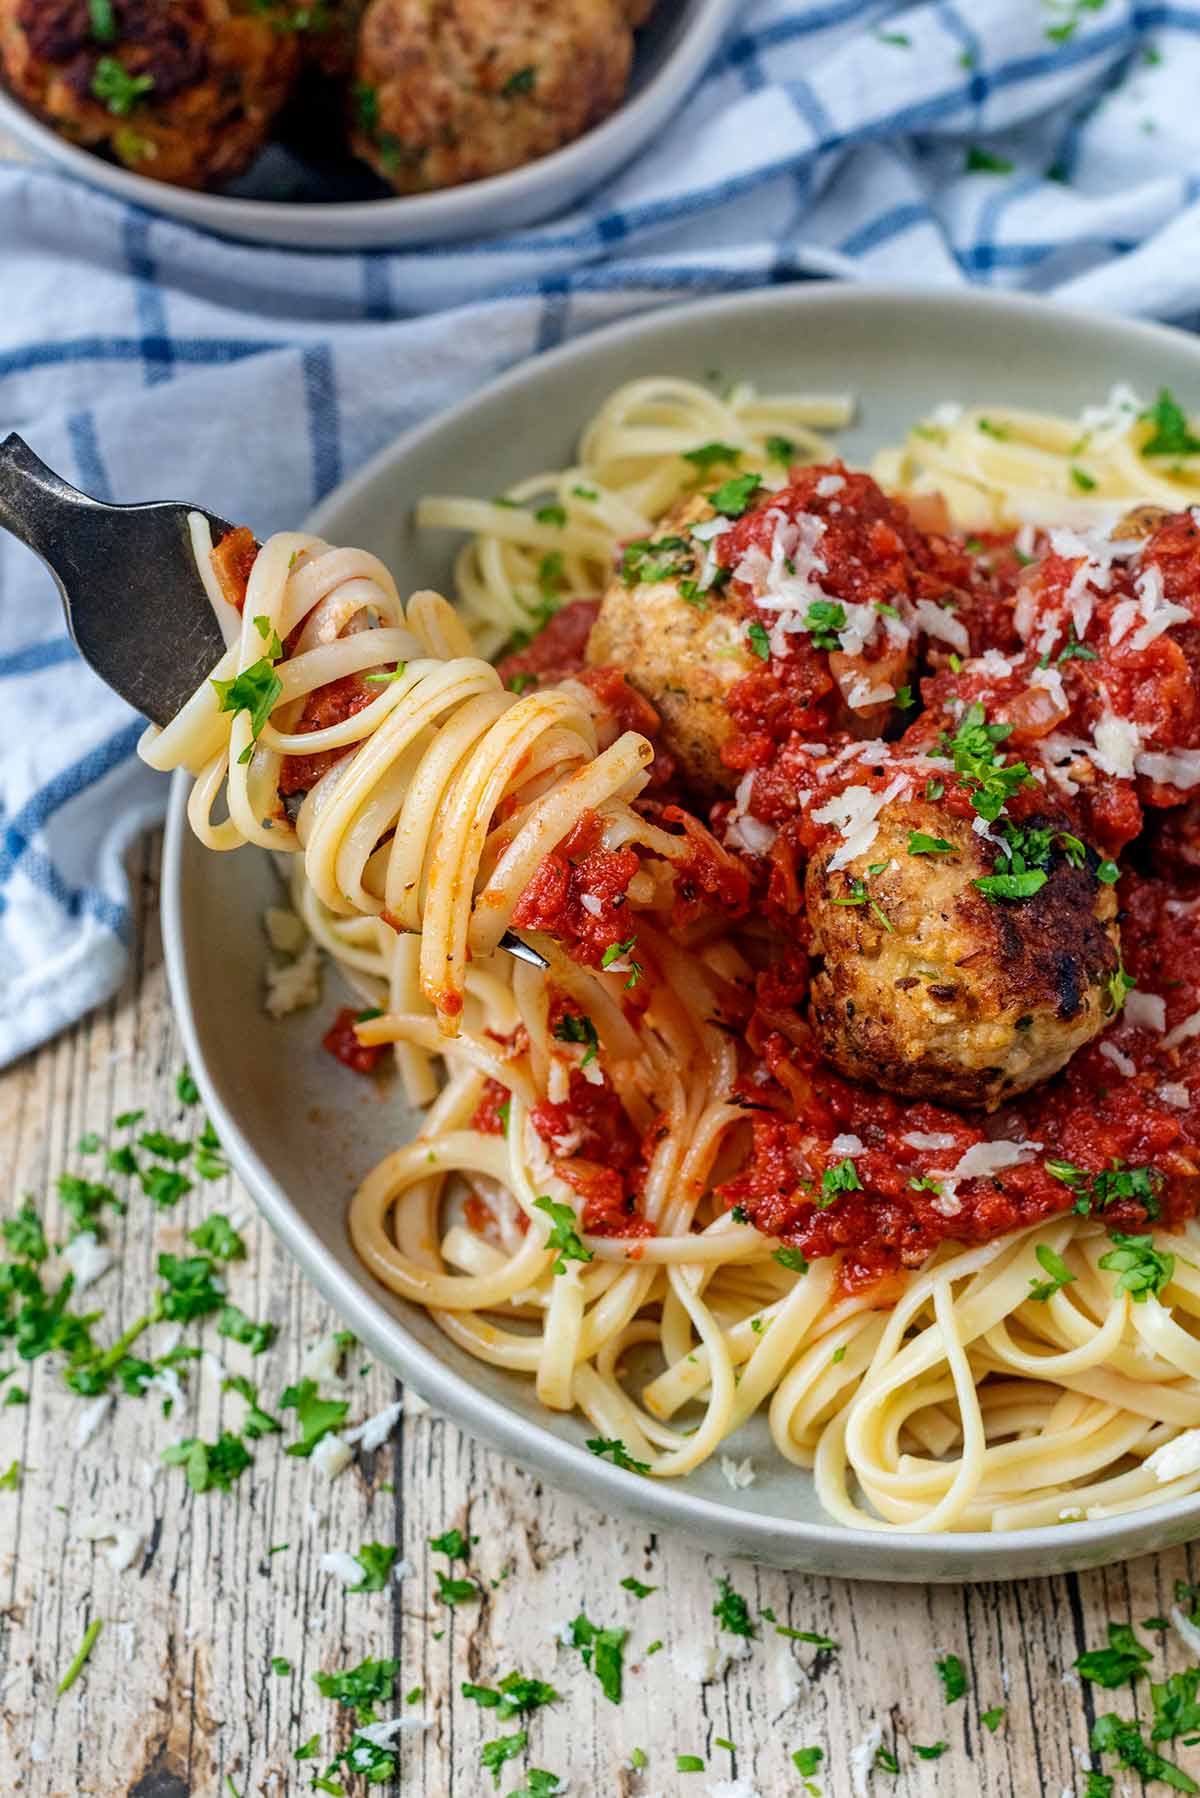 A fork picking up some spaghetti from a plate with meatballs on it.